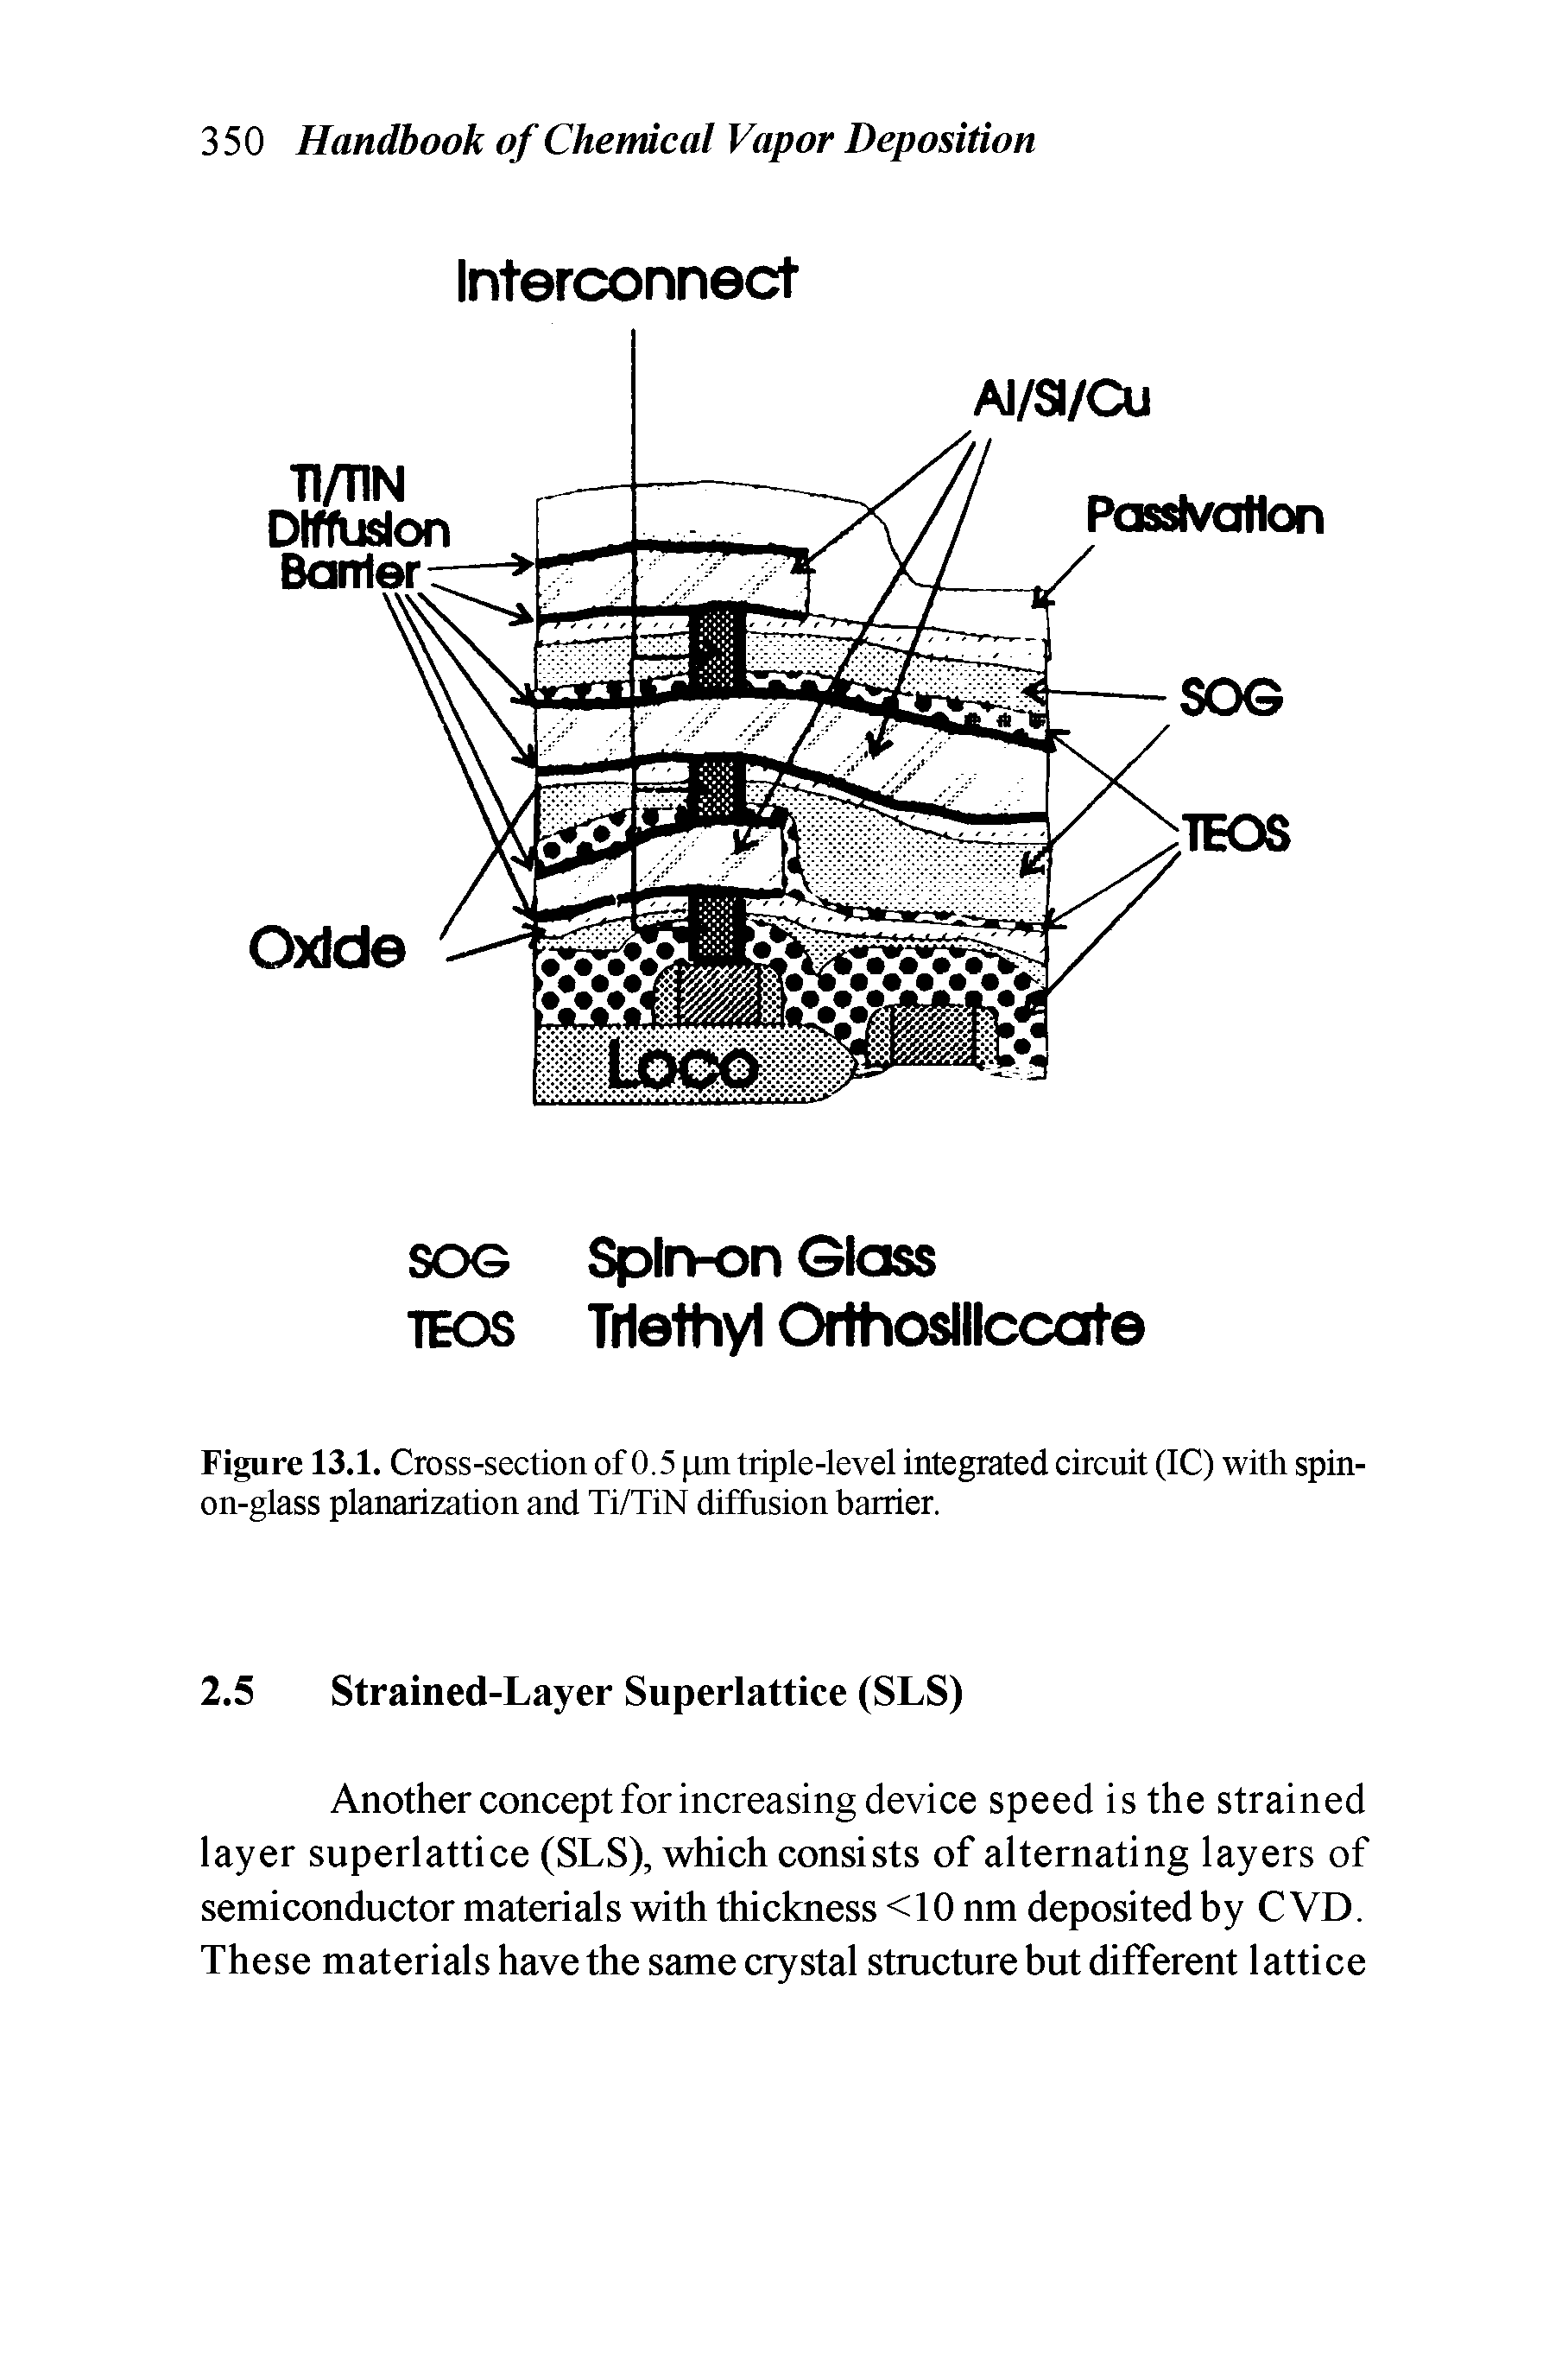 Figure 13.1. Cross-section of 0.5 triple-level integrated circuit (IC) with spin-on-glass planarization and Ti/TiN diffusion barrier.